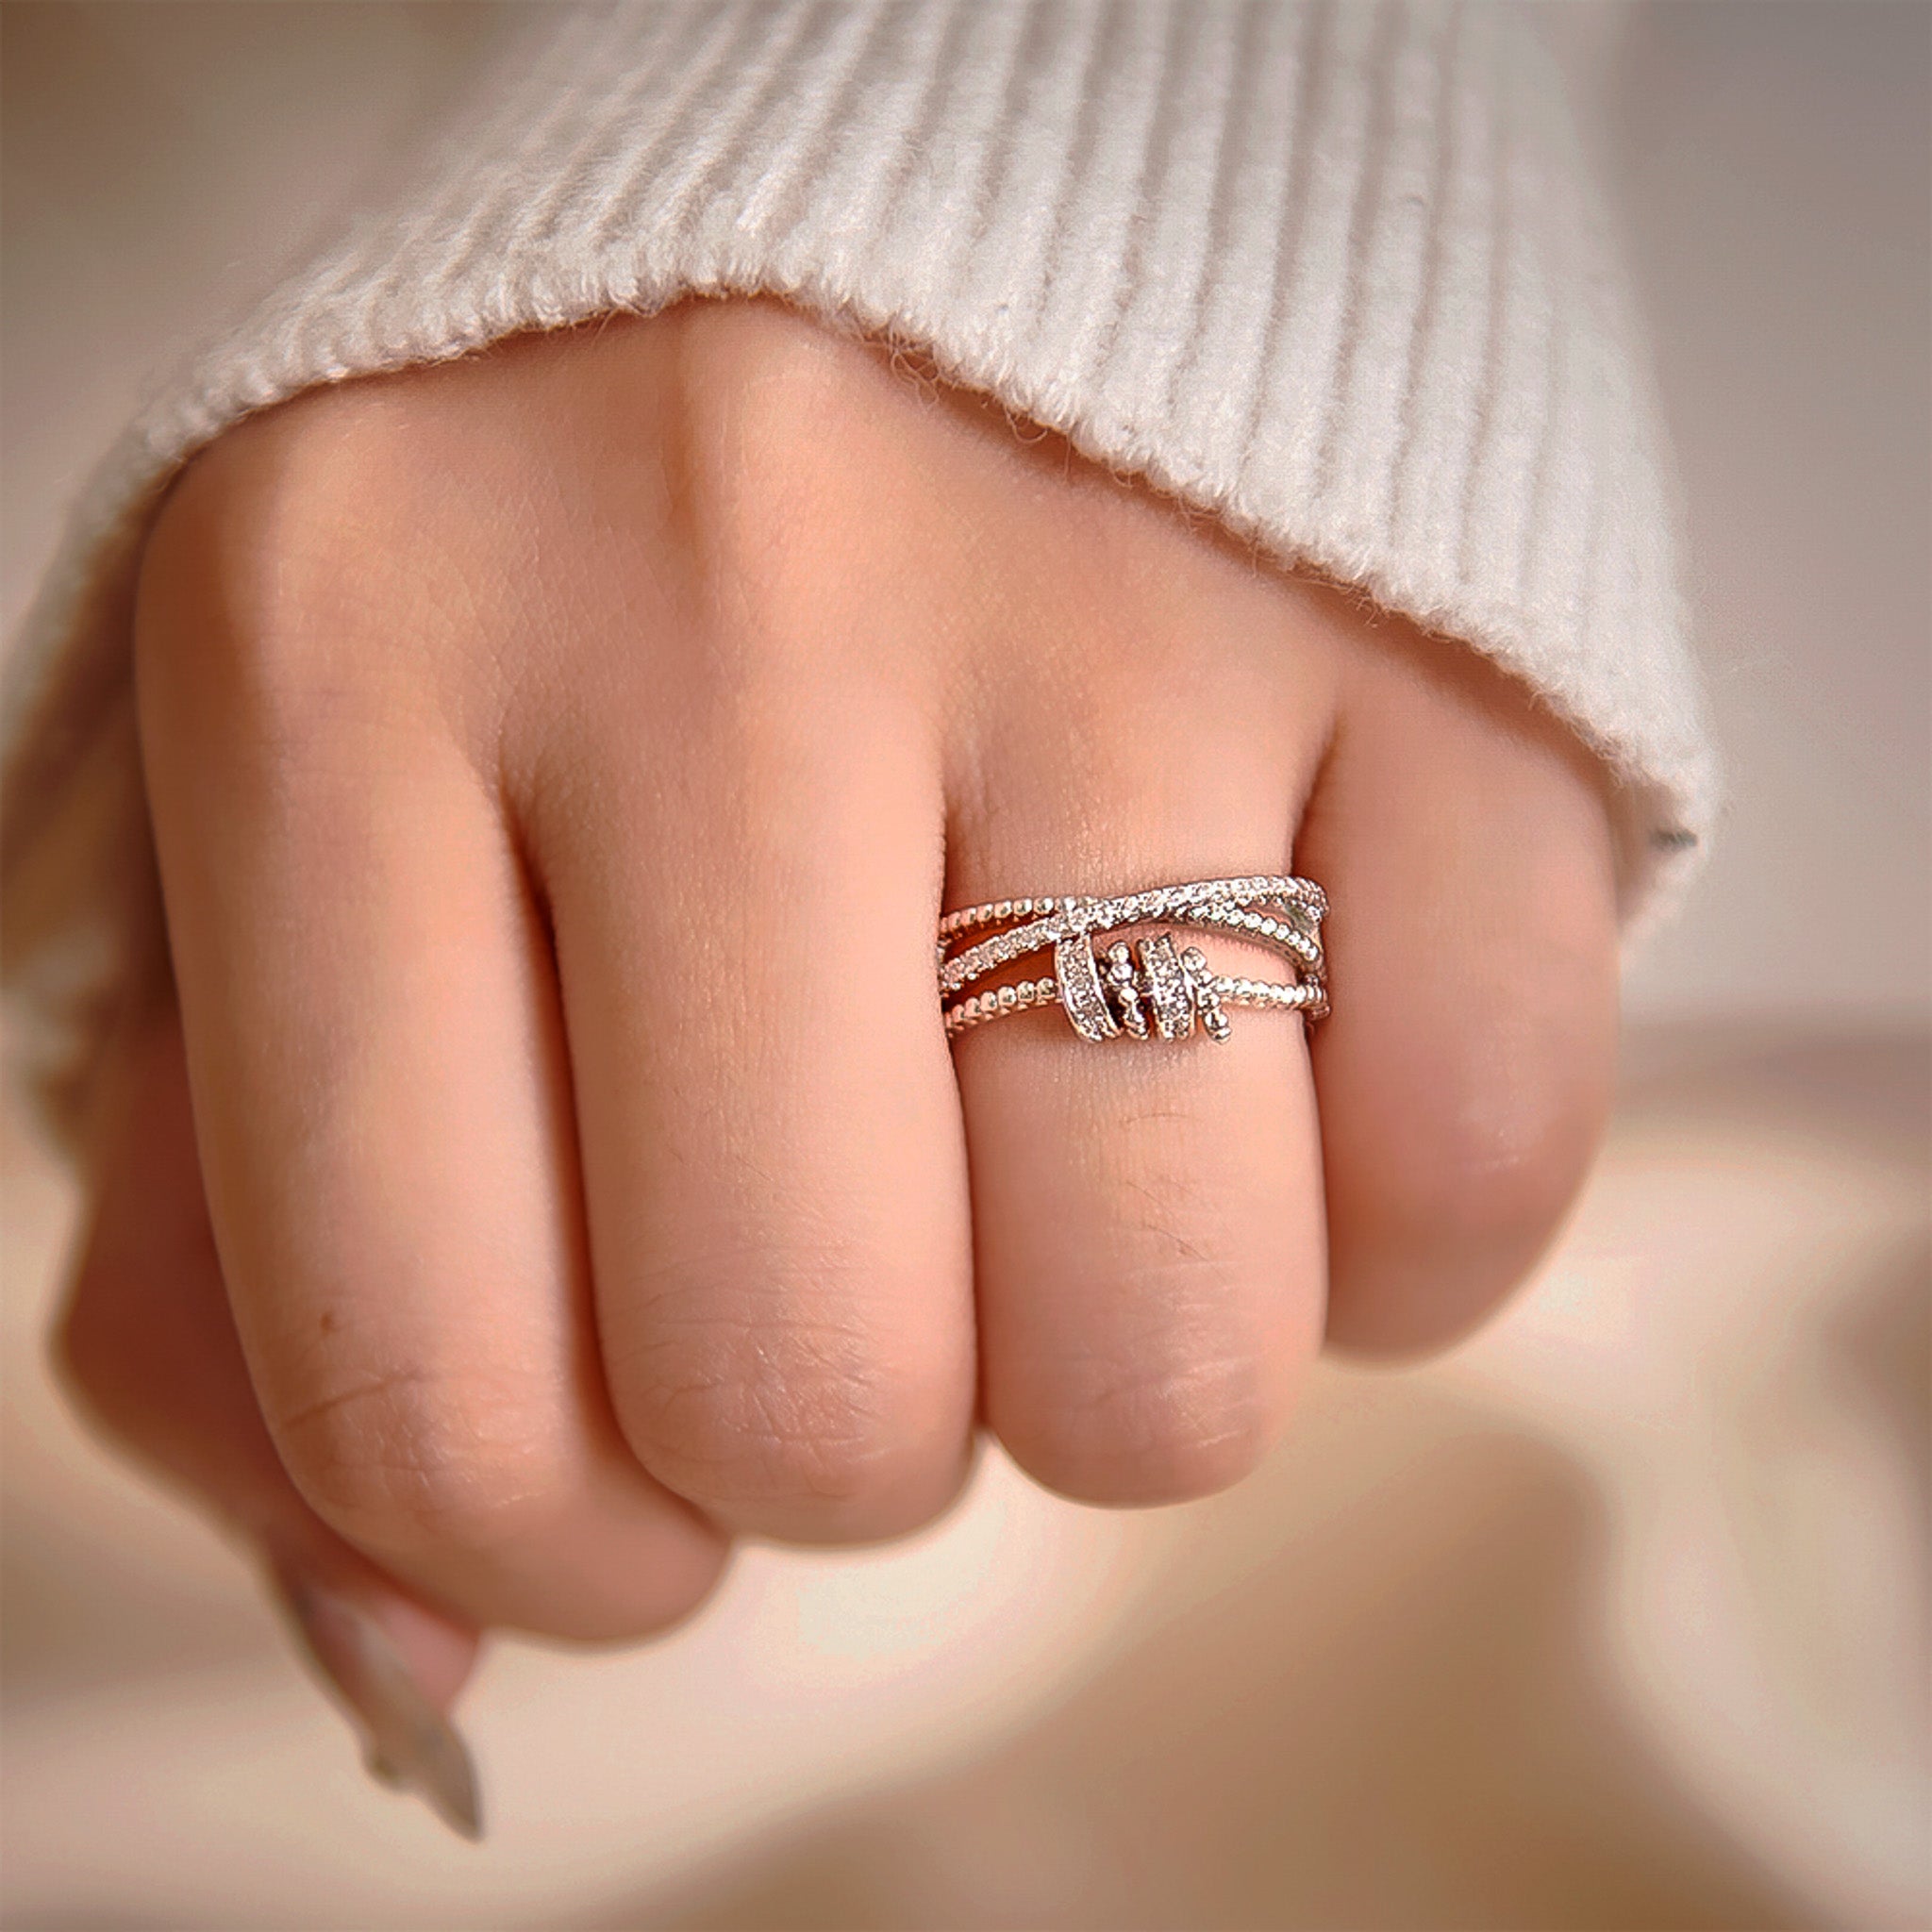 [Buy 1 Get 1 FREE] To My Daughter "Loved Beyond Measure" - Anxiety Ring Set